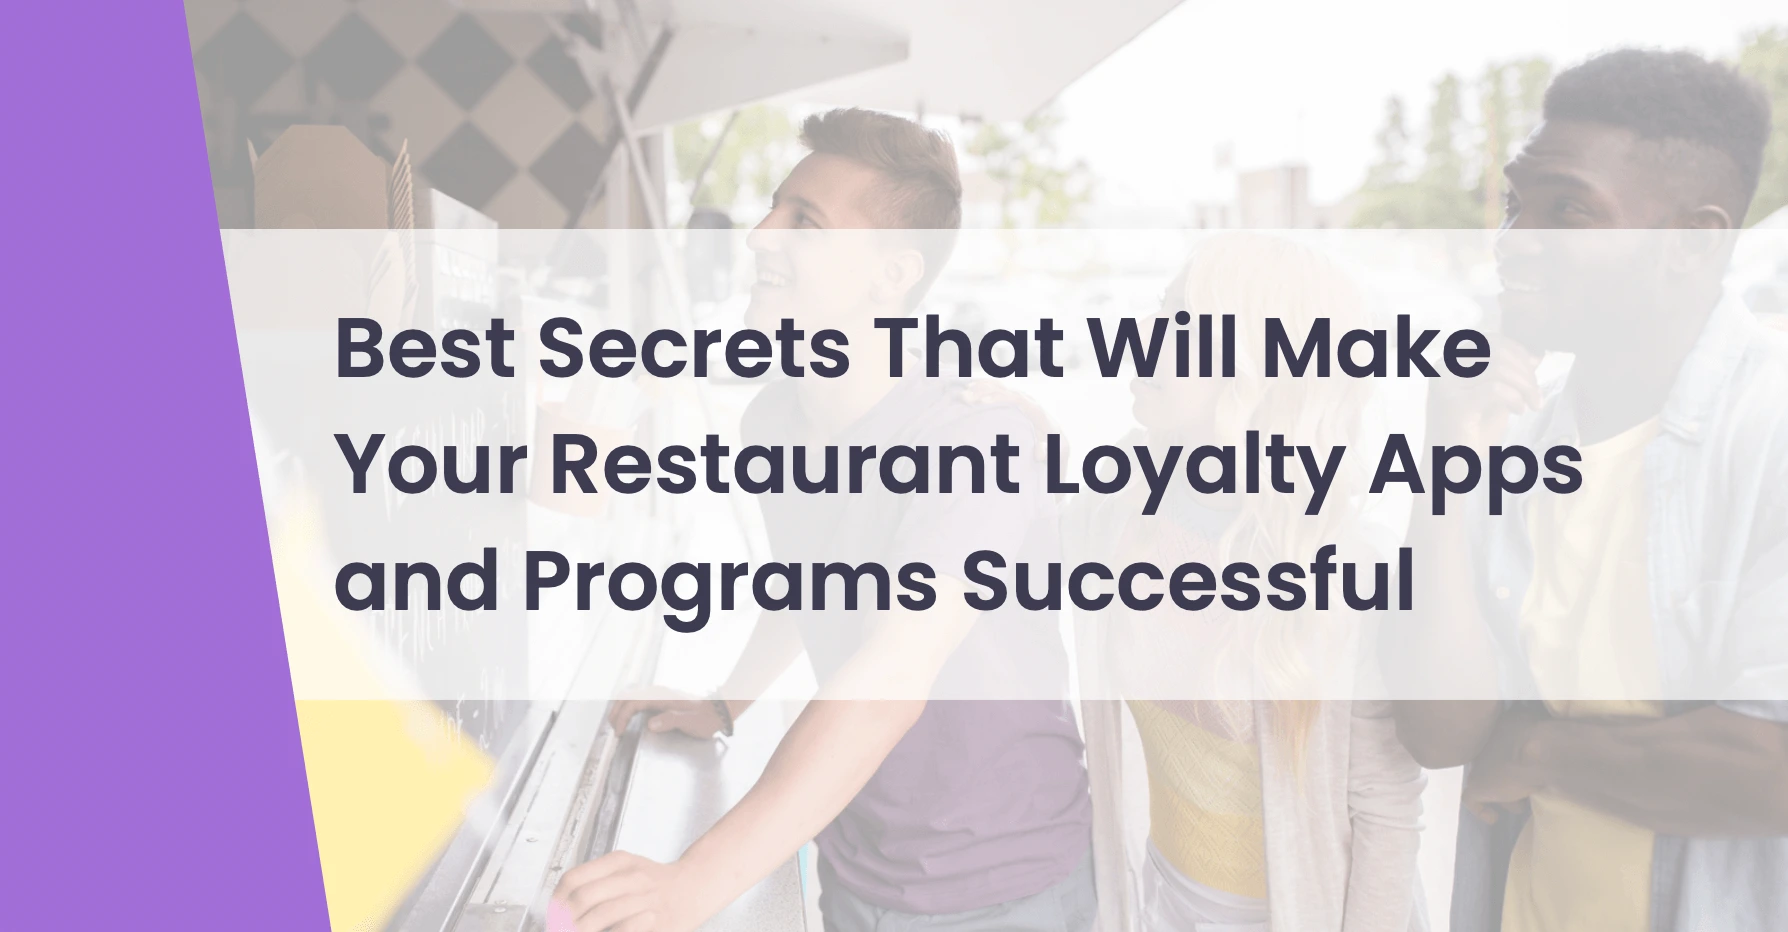 Best secrets that will make your restaurant loyalty apps